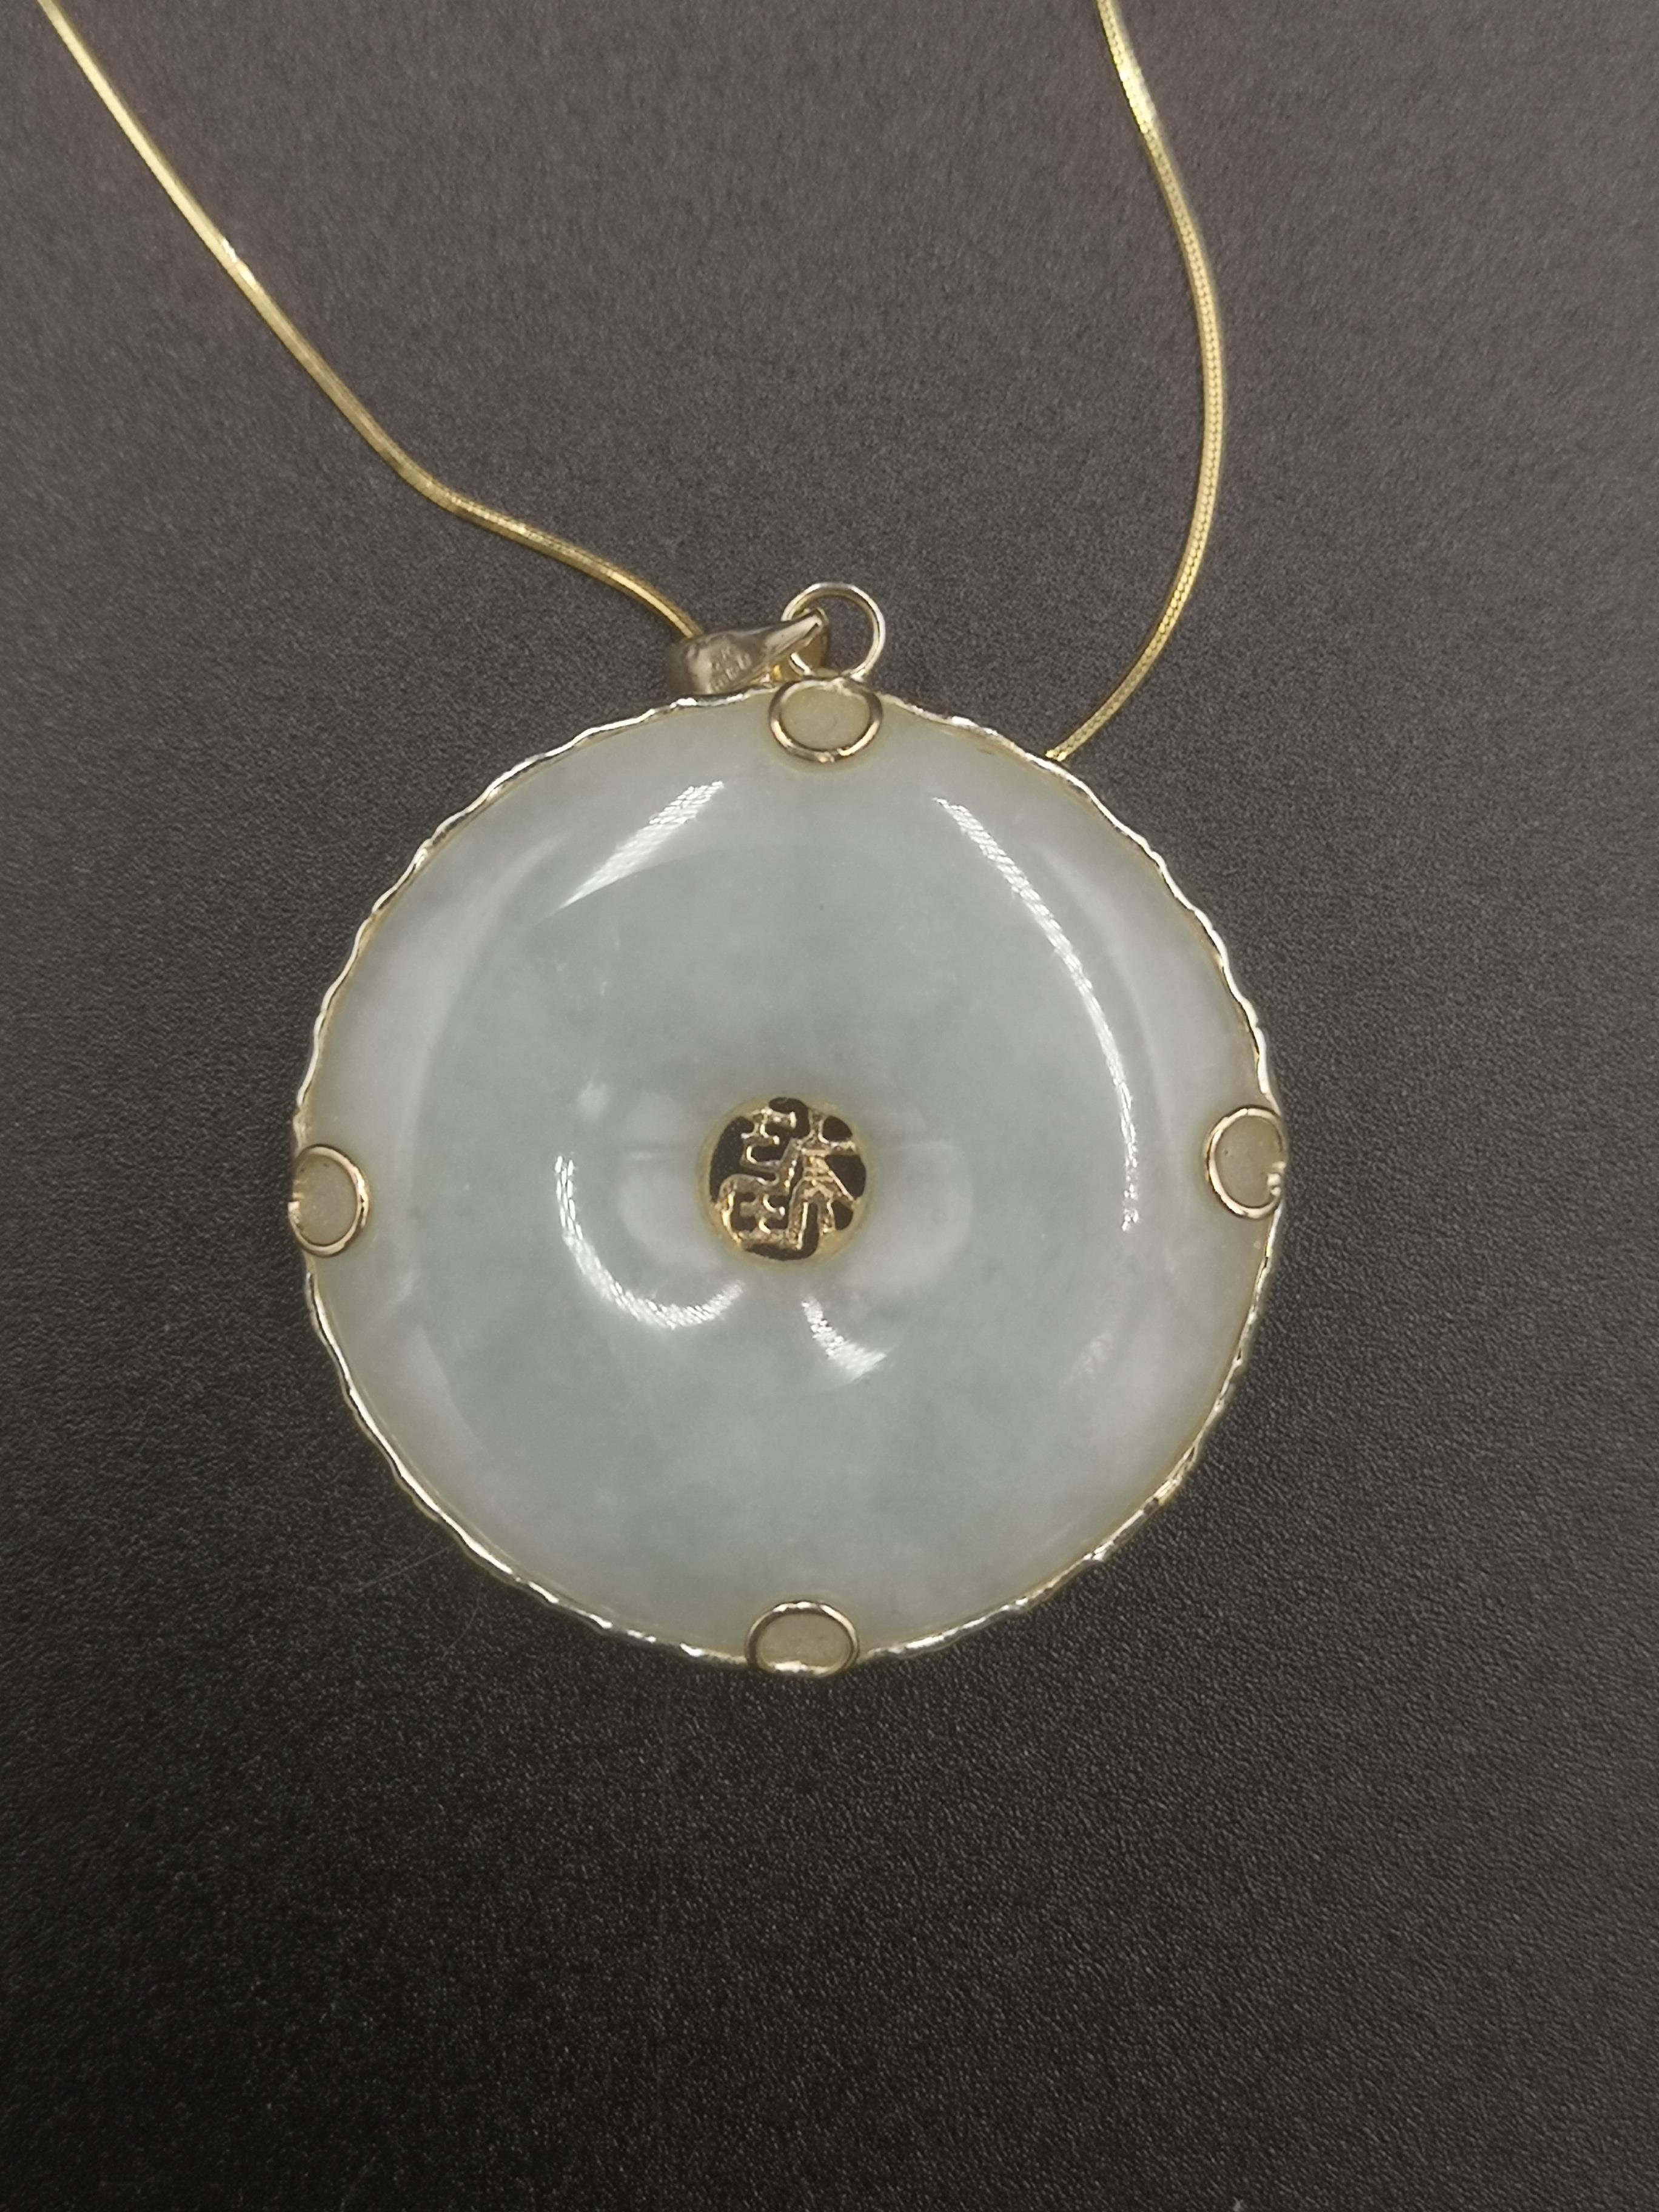 14ct gold and jade pendant - Image 3 of 4